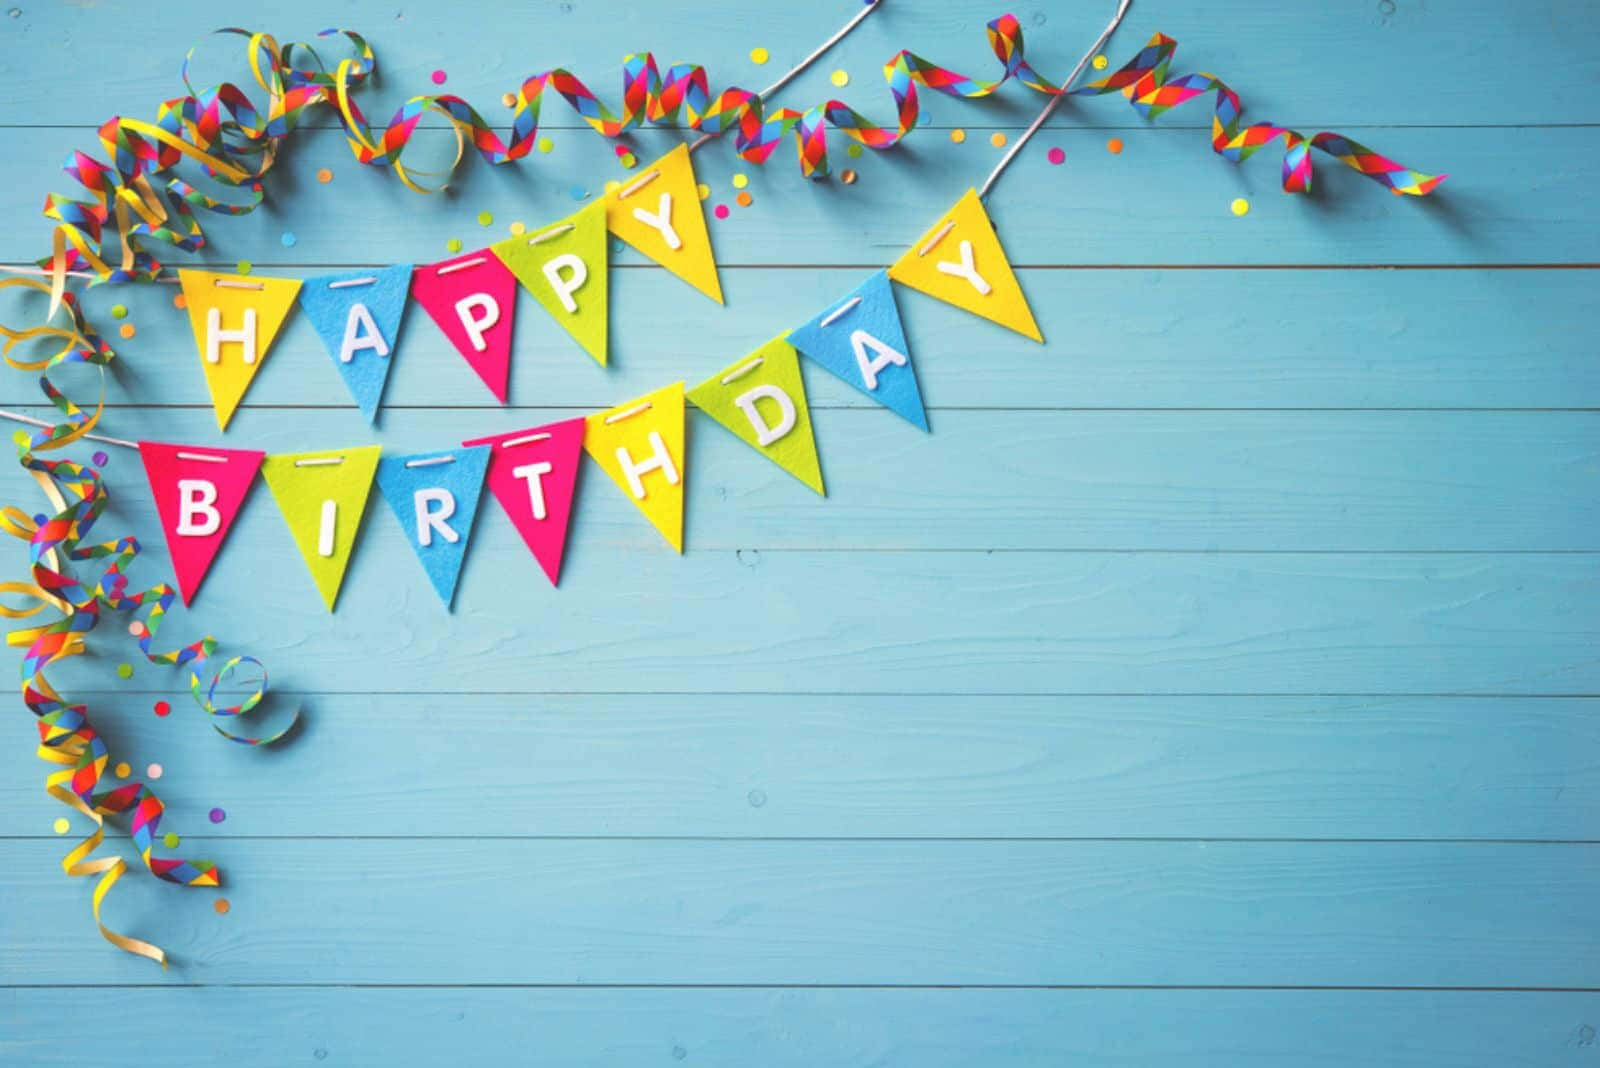 Brighten up any birthday with this vibrant Blue Birthday background.